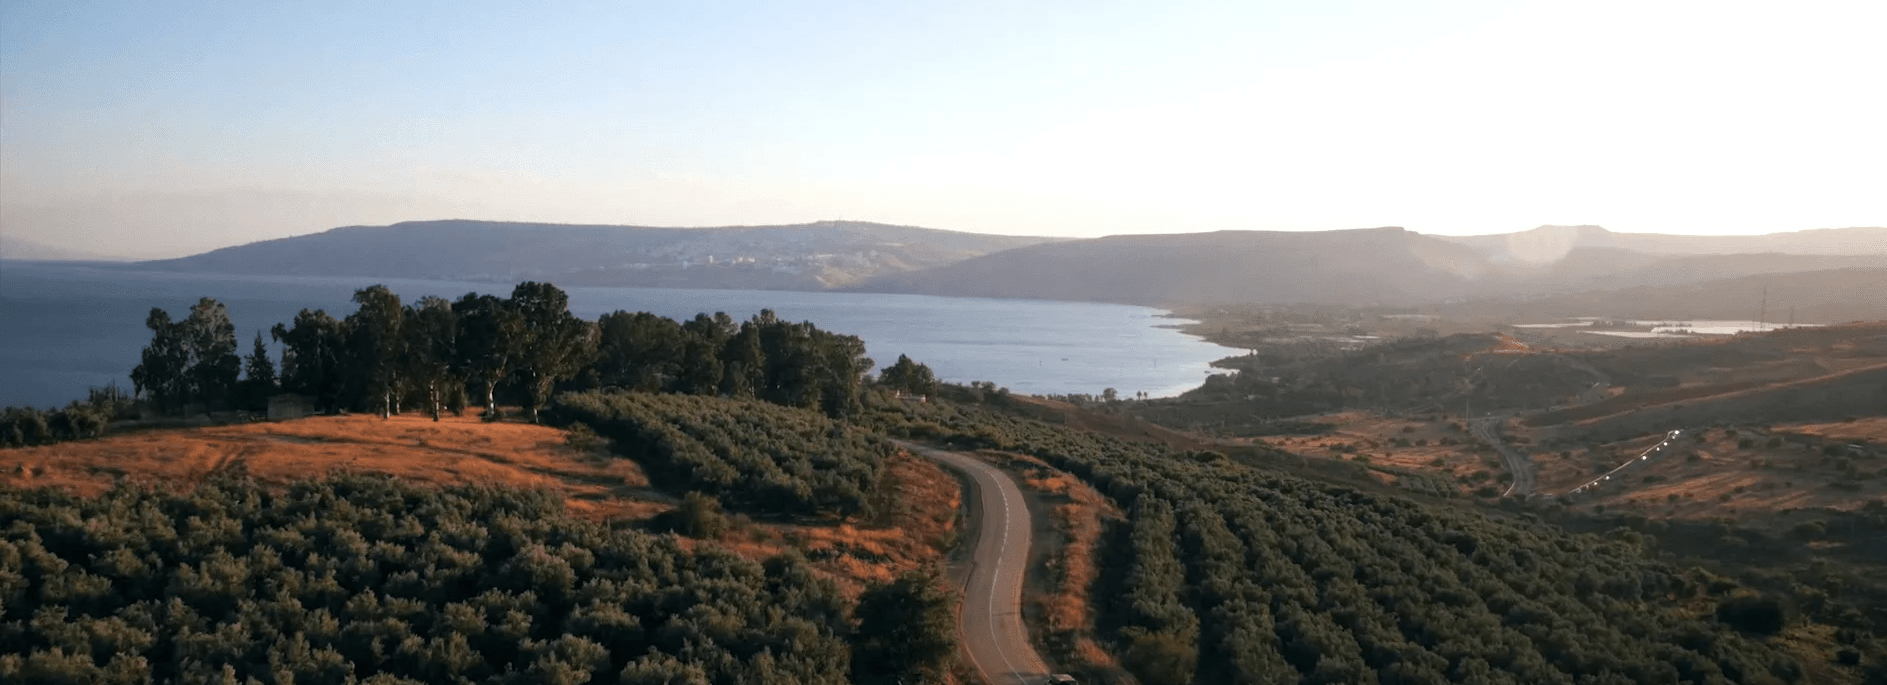 View of the Sea of Galilee from a neighboring hillside